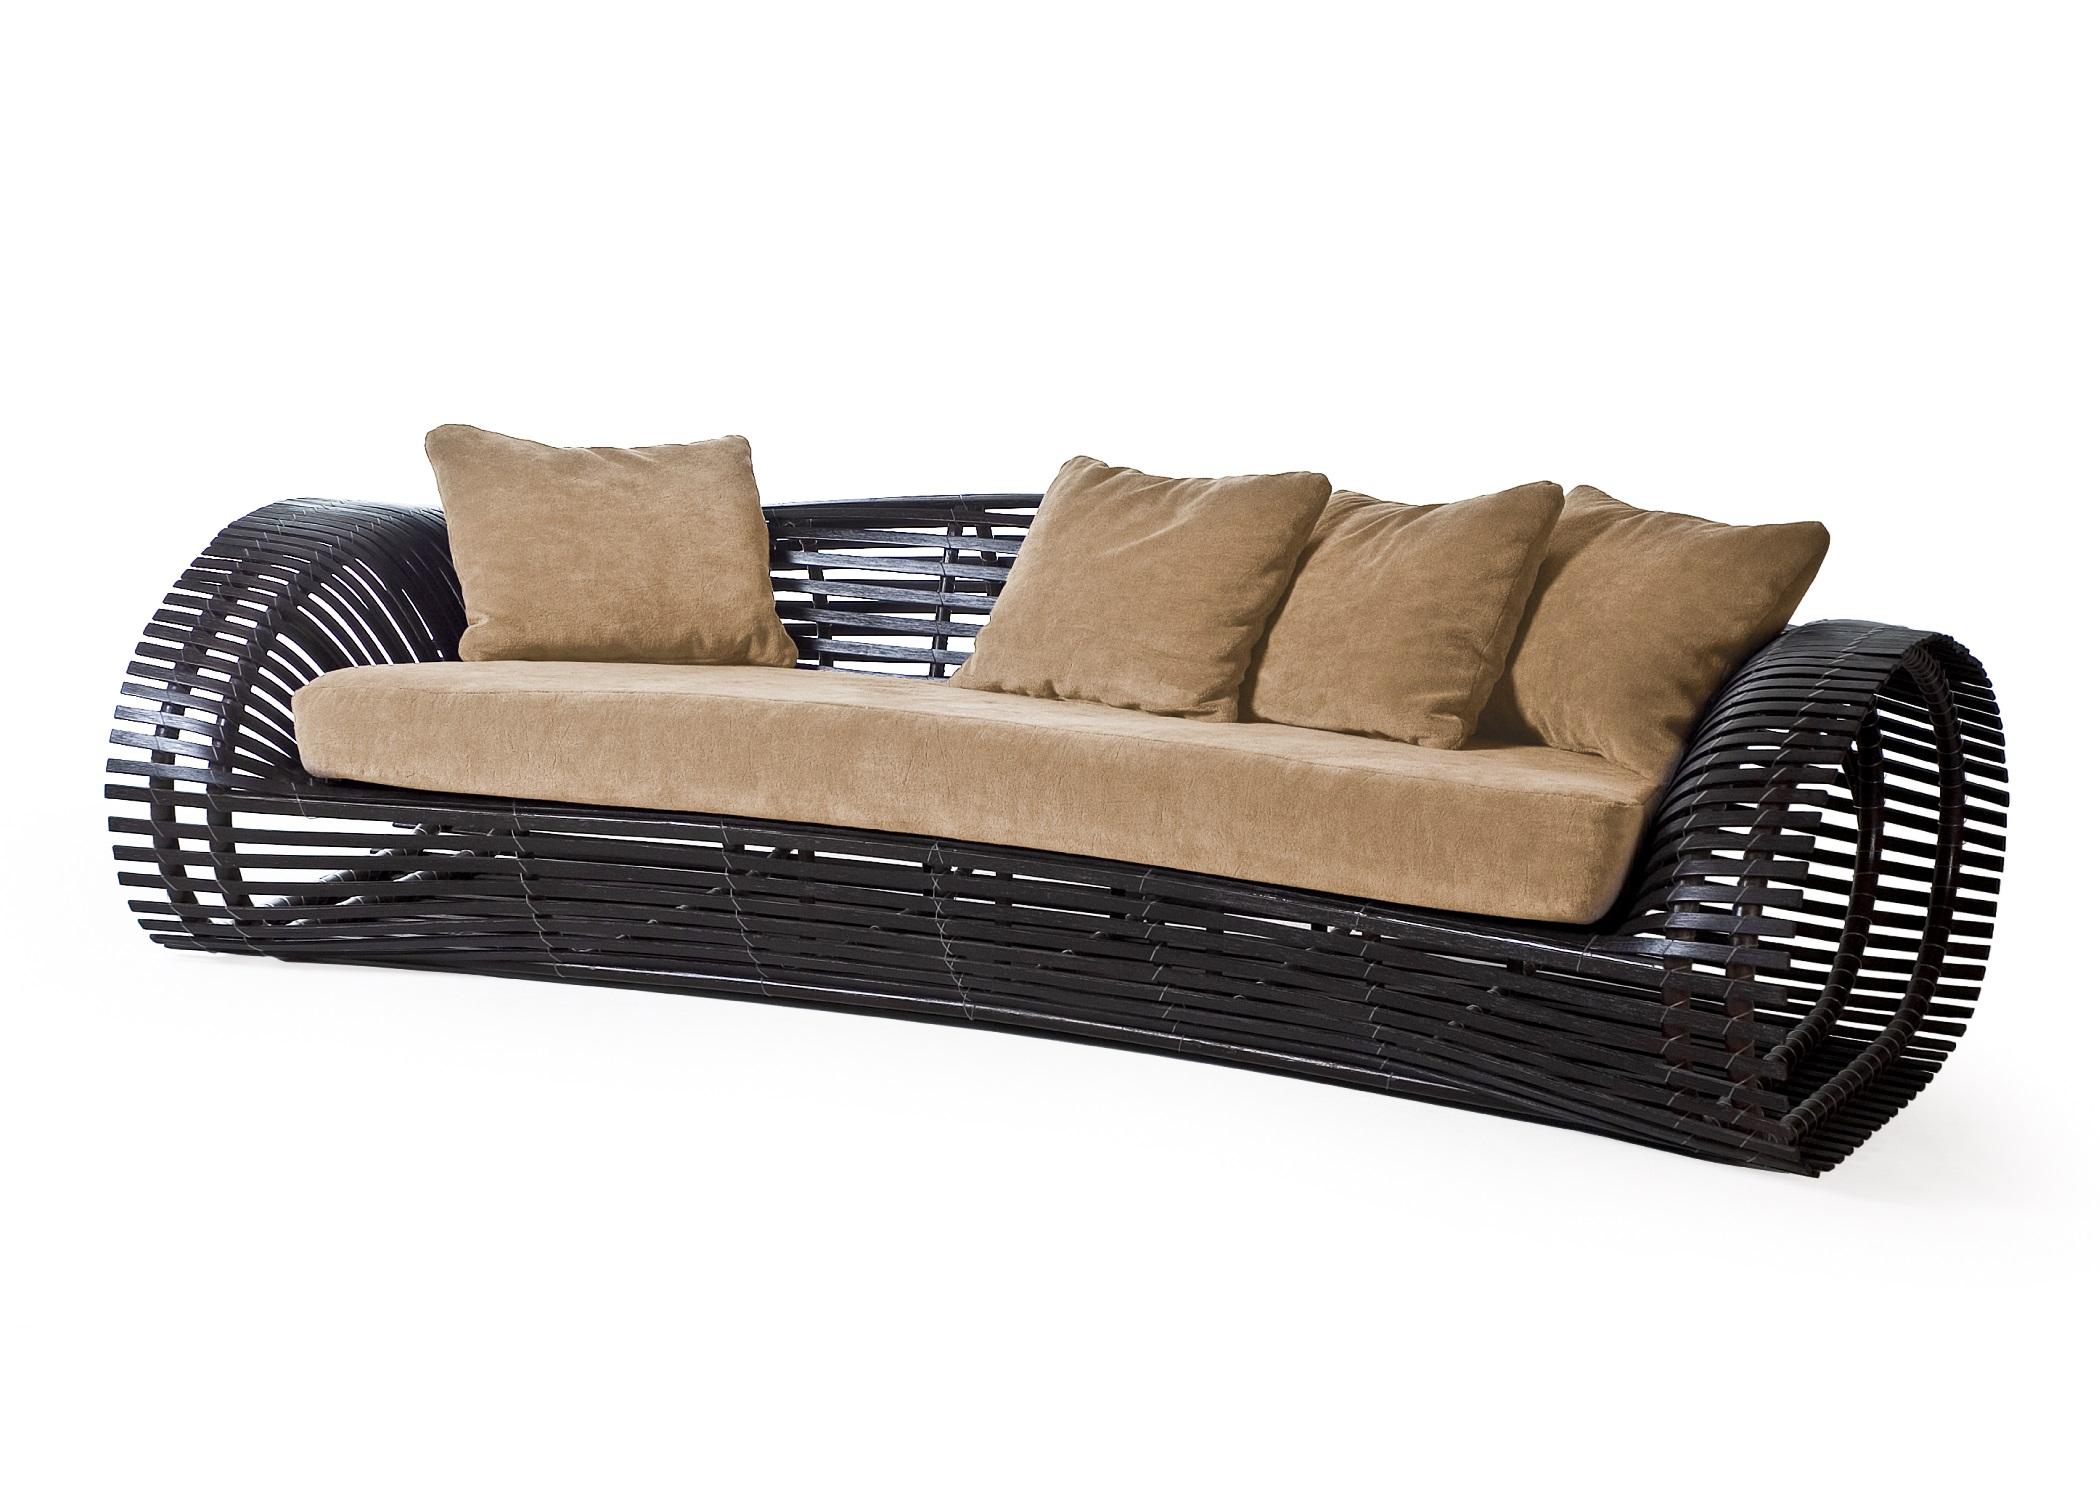 Indoor Lolah sofa by Kenneth Cobonpue
Materials: Rattan, nylon.
Also available in other colors and for outdoors.
Dimensions: 120 cm x 240 cm x H 72 cm

Created using construction techniques similar to boat-building, Lolah entices the sitter